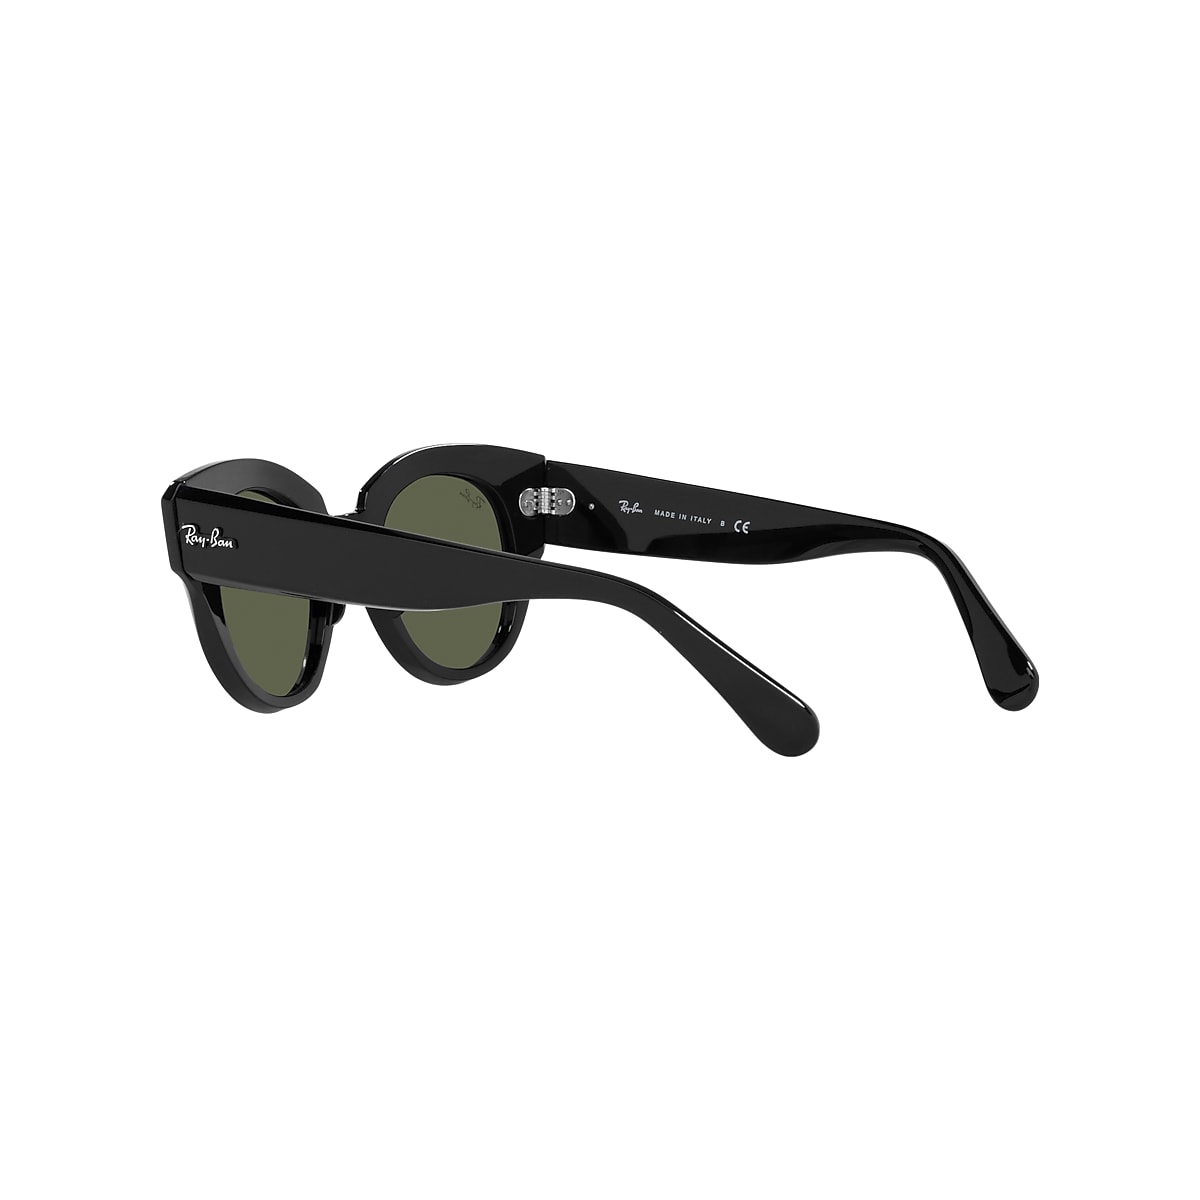 Roundabout Sunglasses in Black and Green | Ray-Ban®